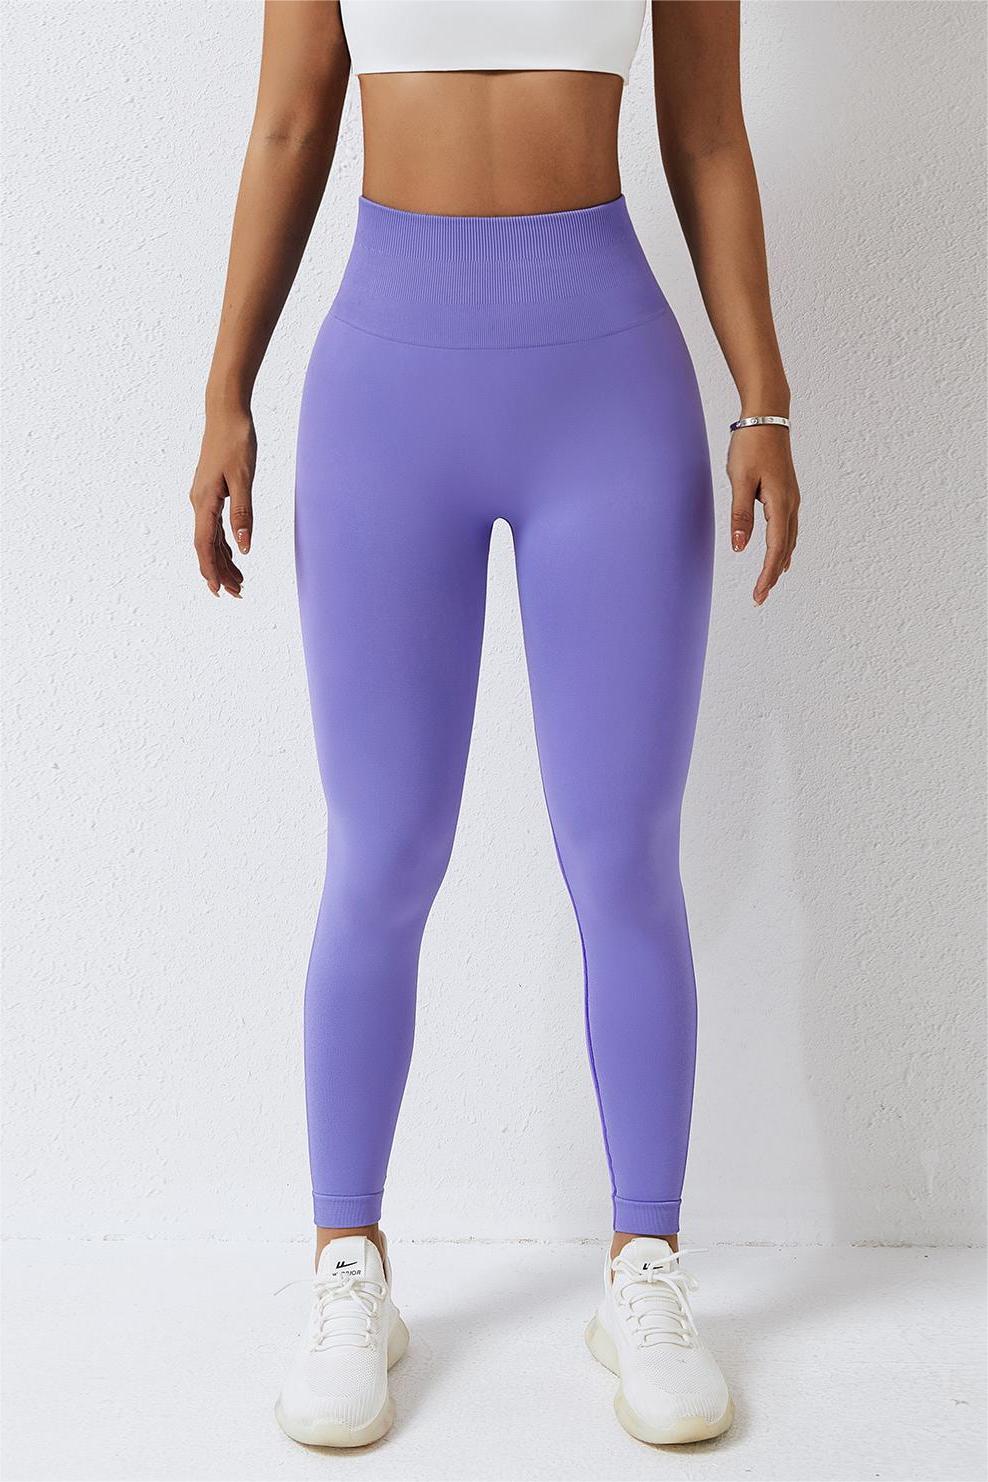 Ribbed High Waisted Seamless Scrunch Bum Leggings in Lavender with